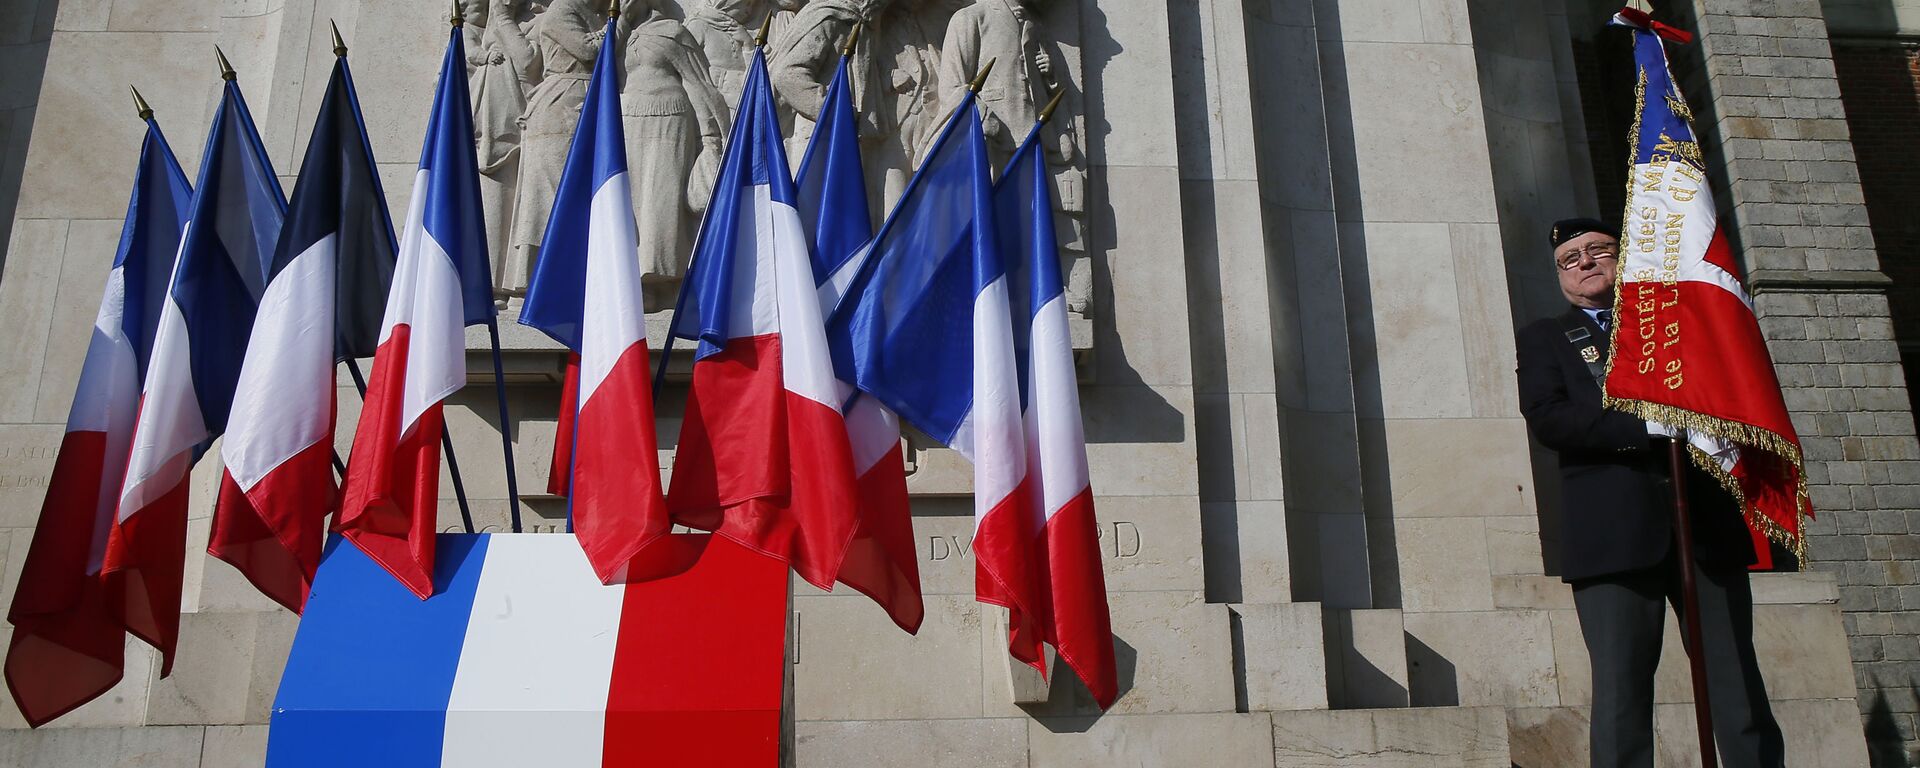 A veteran holds a French flag before a ceremony at a WWI and WWII monument in Lille, northern France, Friday May 8, 2020 - Sputnik International, 1920, 16.09.2021